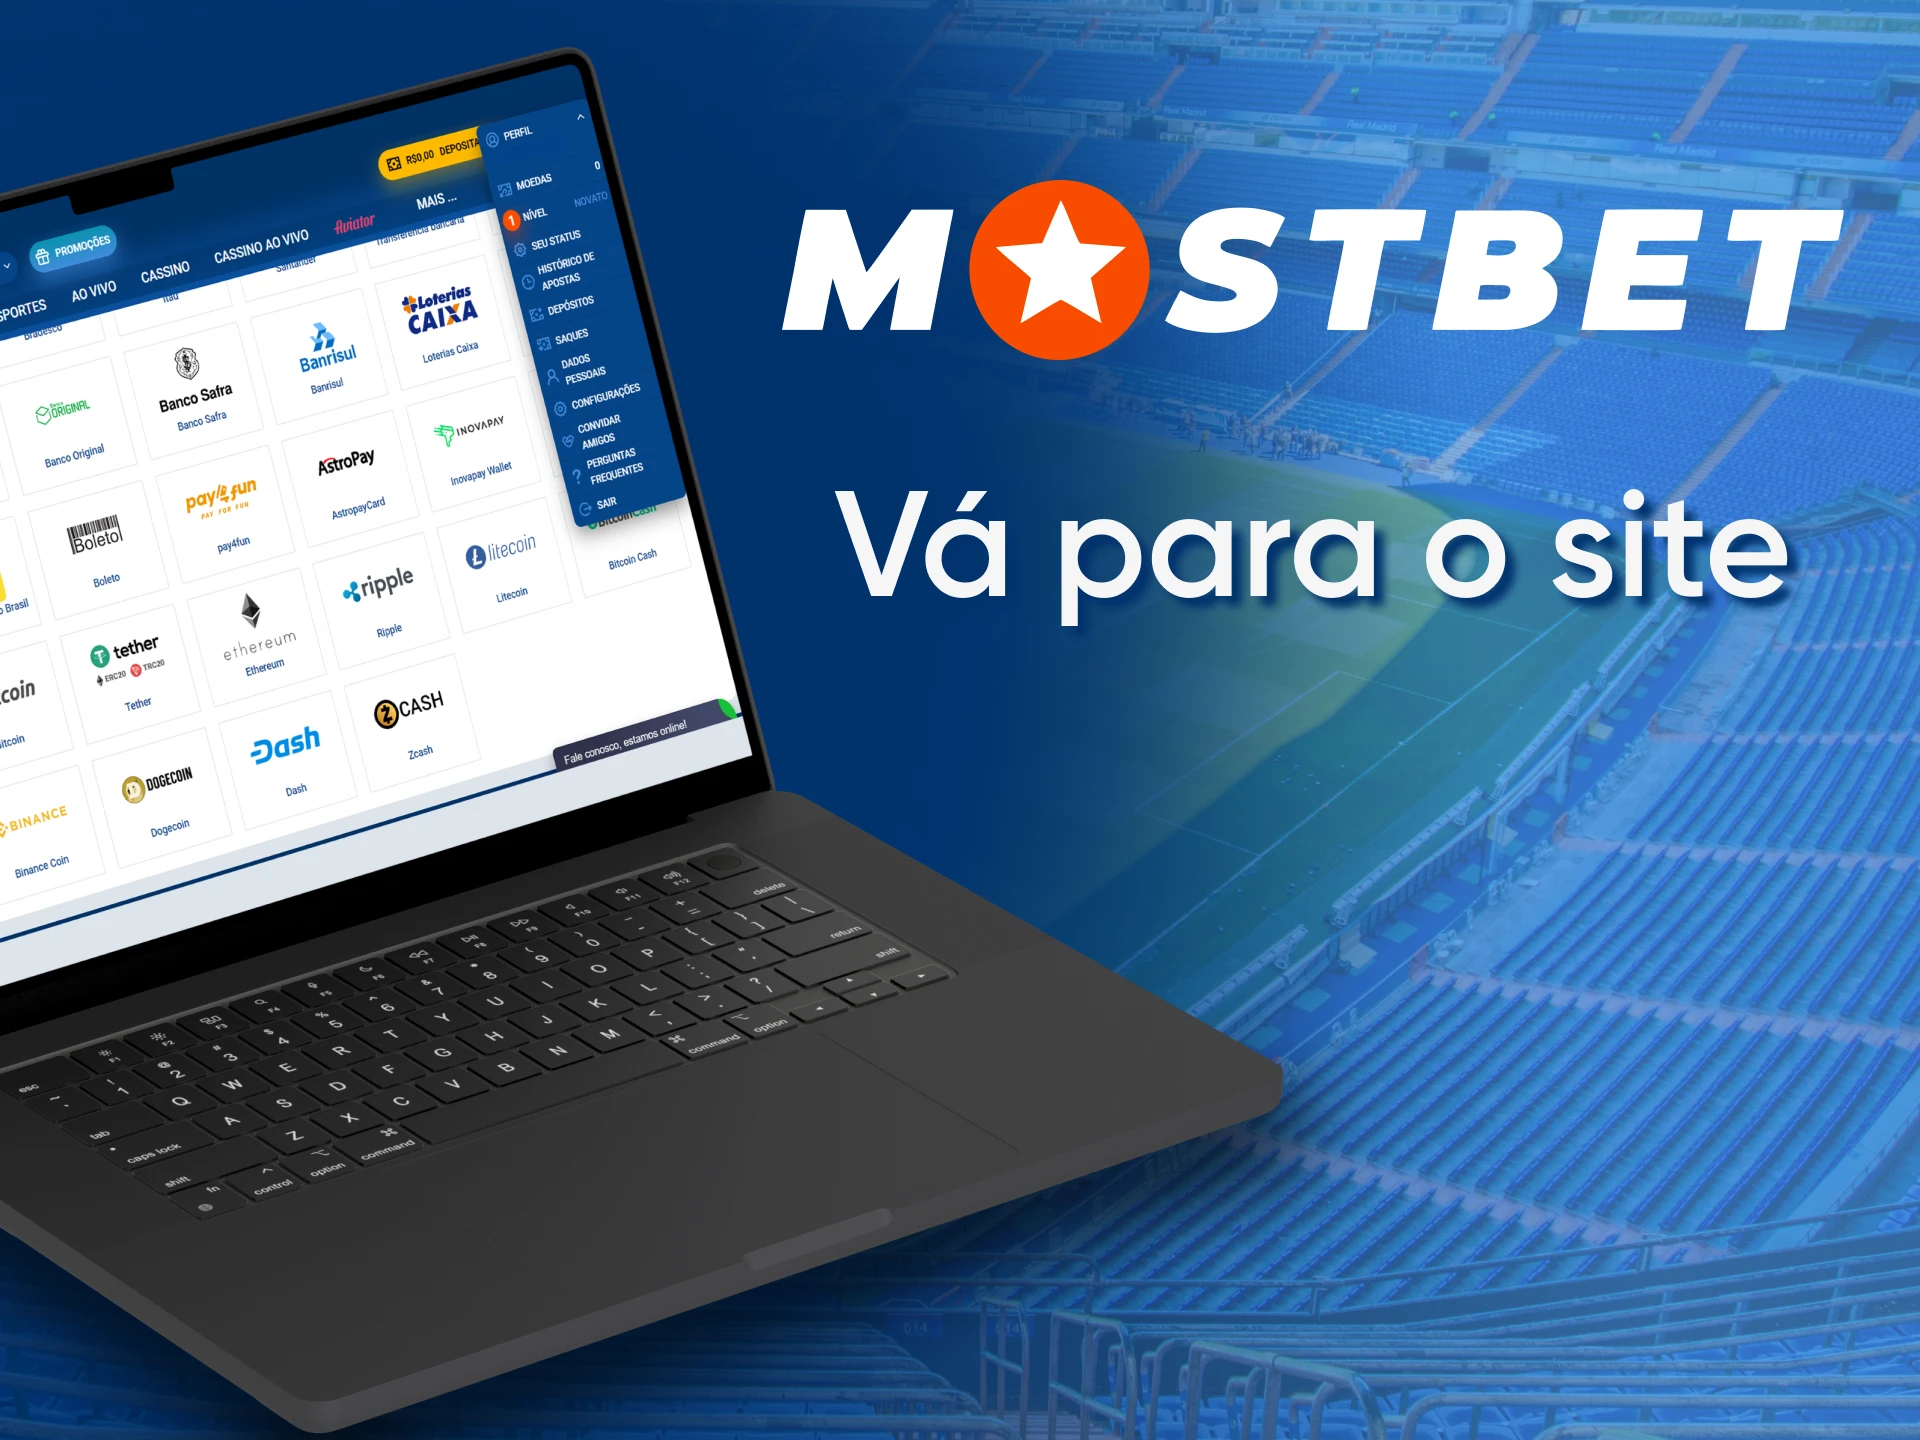 Go to the official website of Mostbet in Brazil.